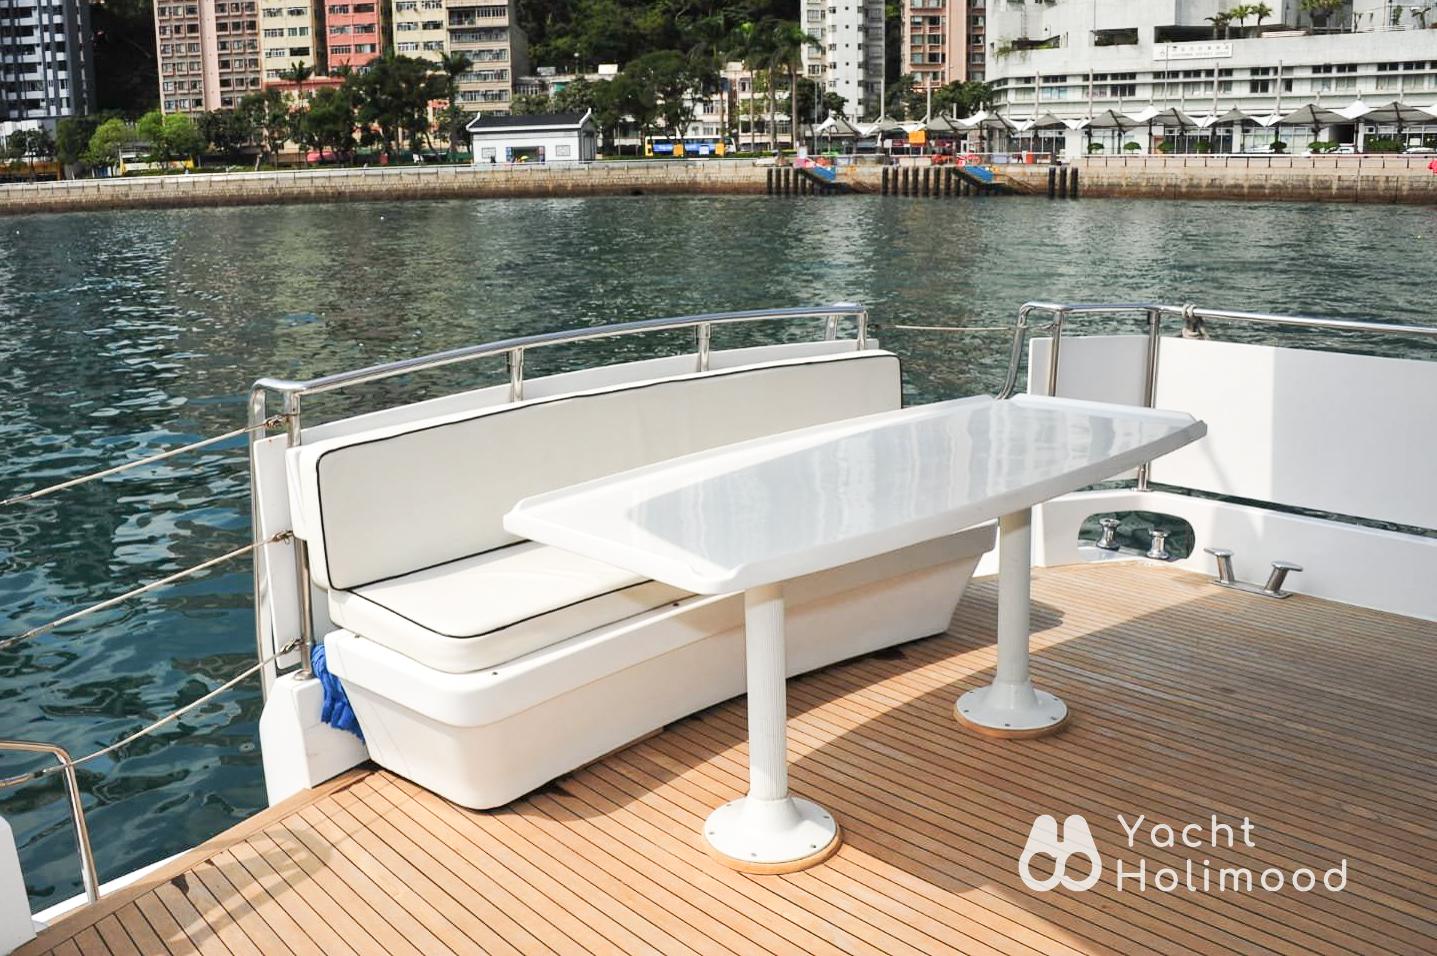 TL02 [Hero Series] Western Cruiser All Inclusive Package (Catering, Drinks, Trampoline & Floating Mattress) $529up/ person 6